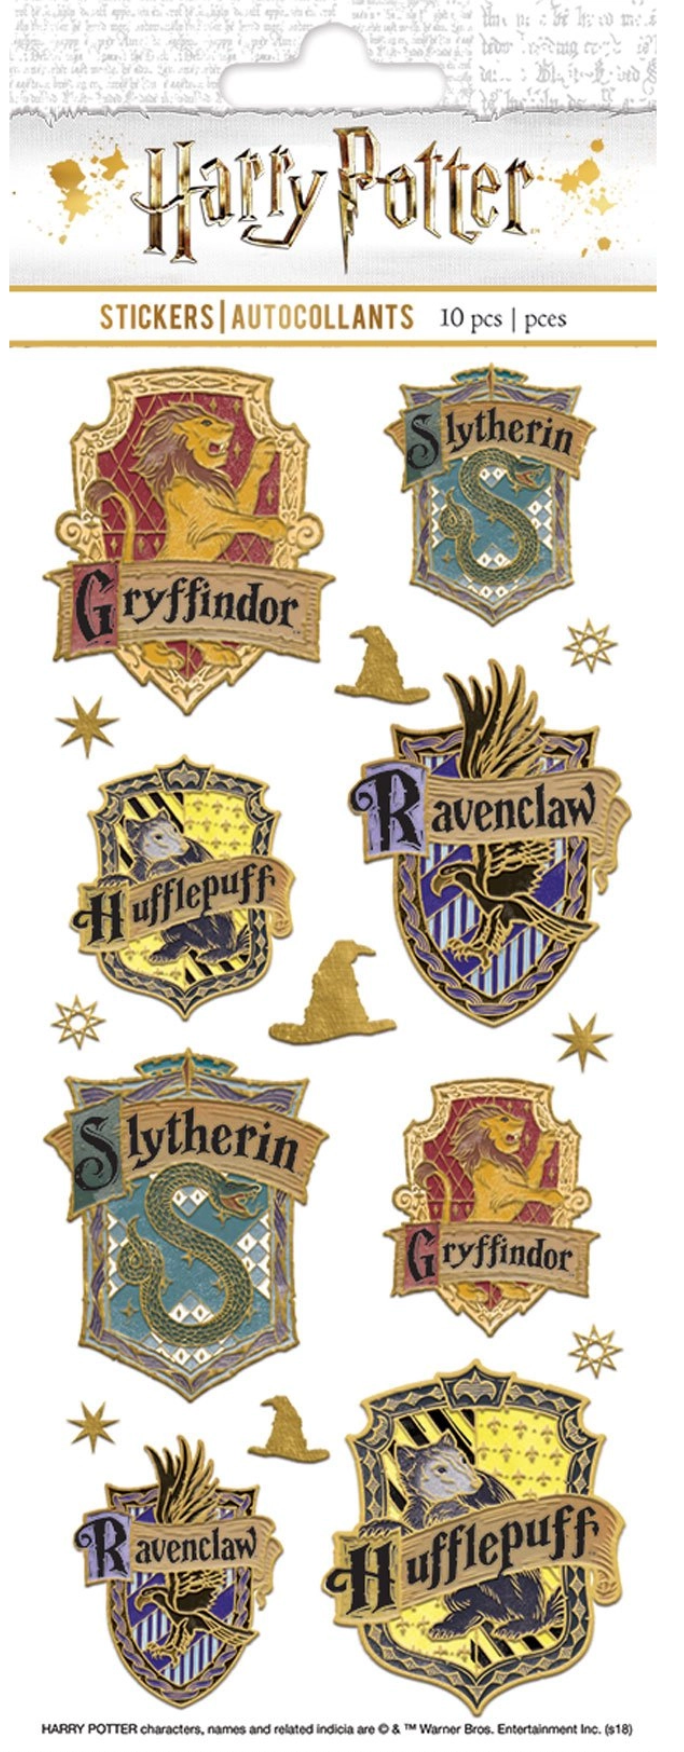  Harry Potter Stickers